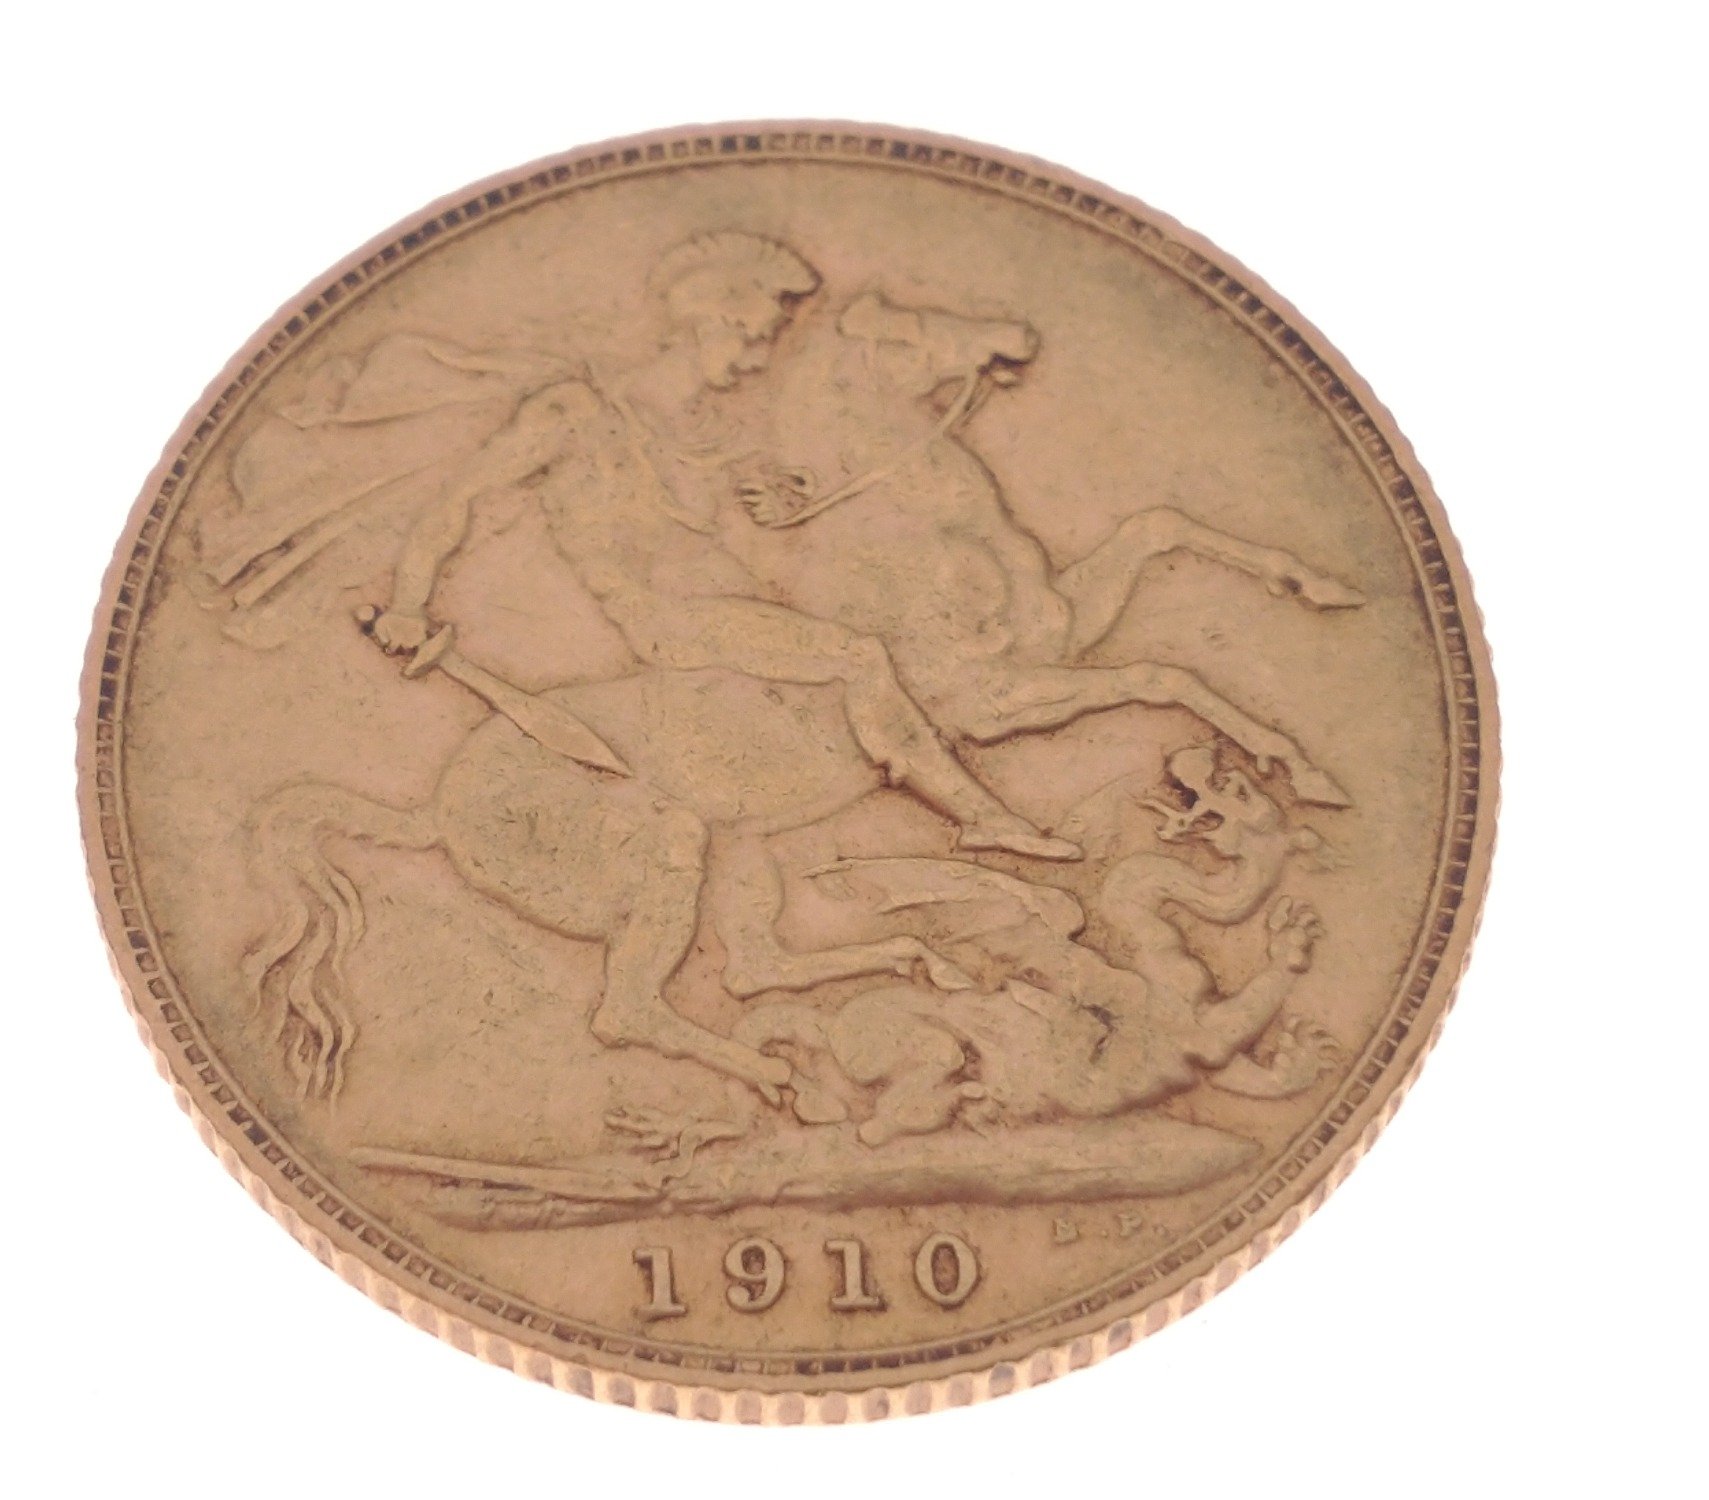 A KING EDWARD 1910 FULL GOLD SOVEREIGN in good condition - last year of his reign.